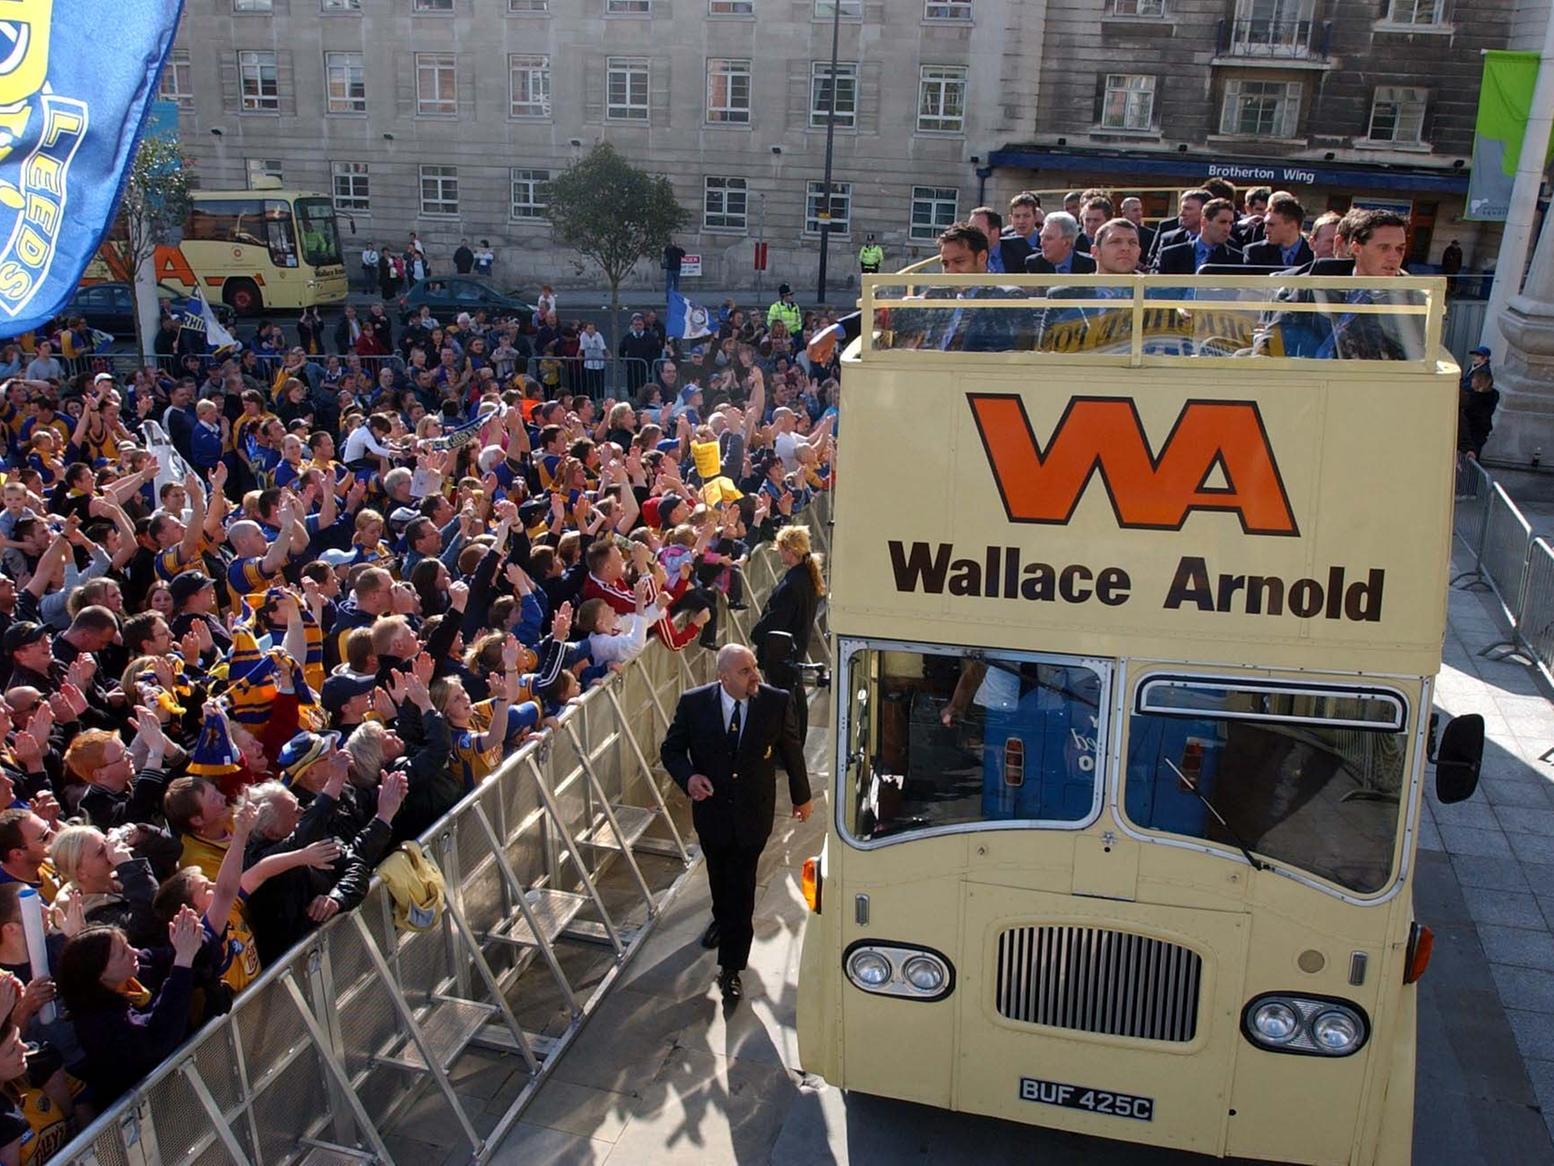 Fans greet the Leeds Rhinos in Millennium Square after the team arrived back from the Powergen Cup final against Bradford Bulls in Cardiff.